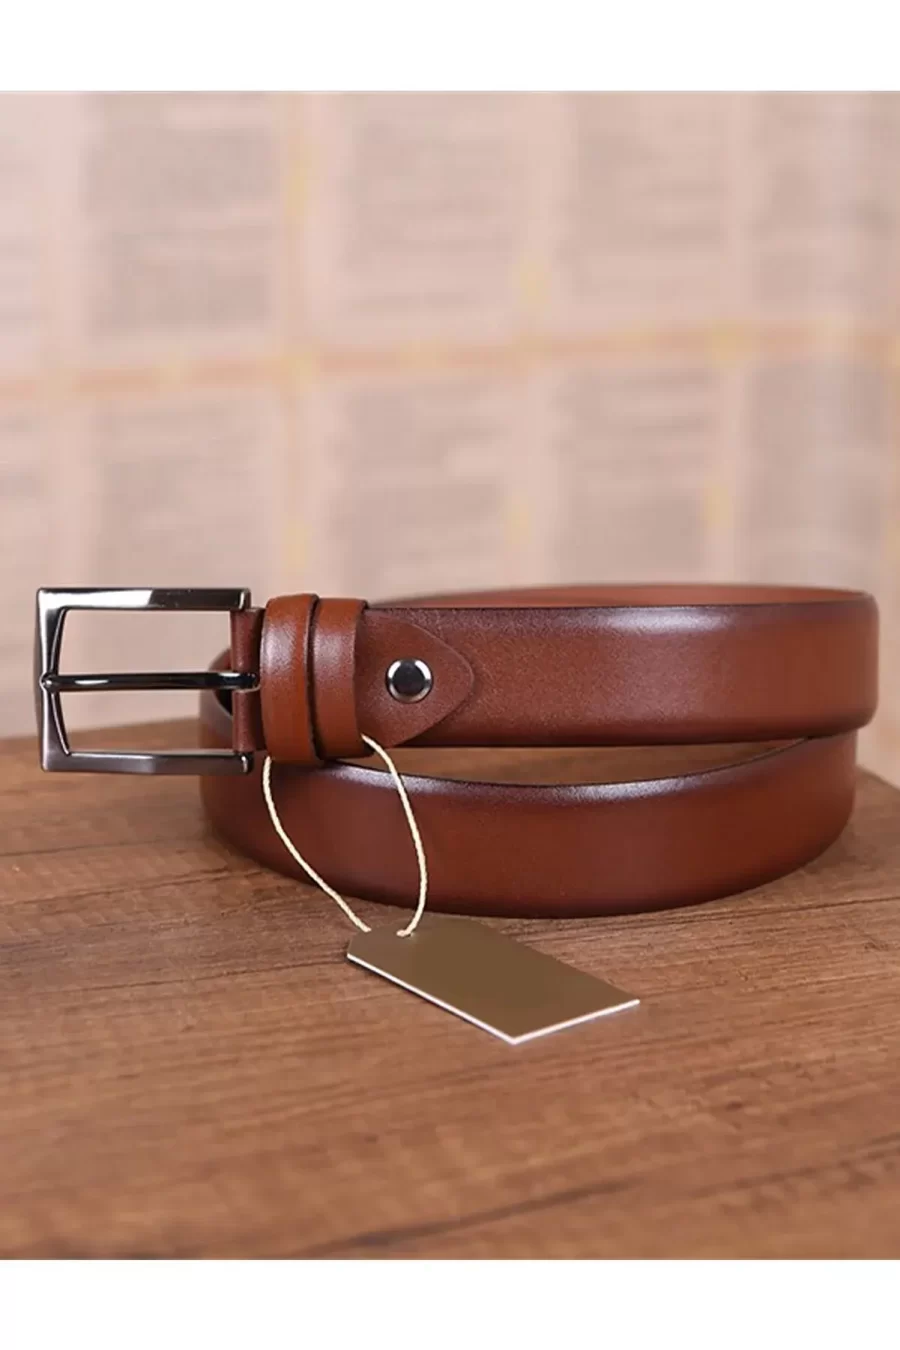 Top Quality Best Quality Mens Belt Dress Brown Leather KD 001 1 8